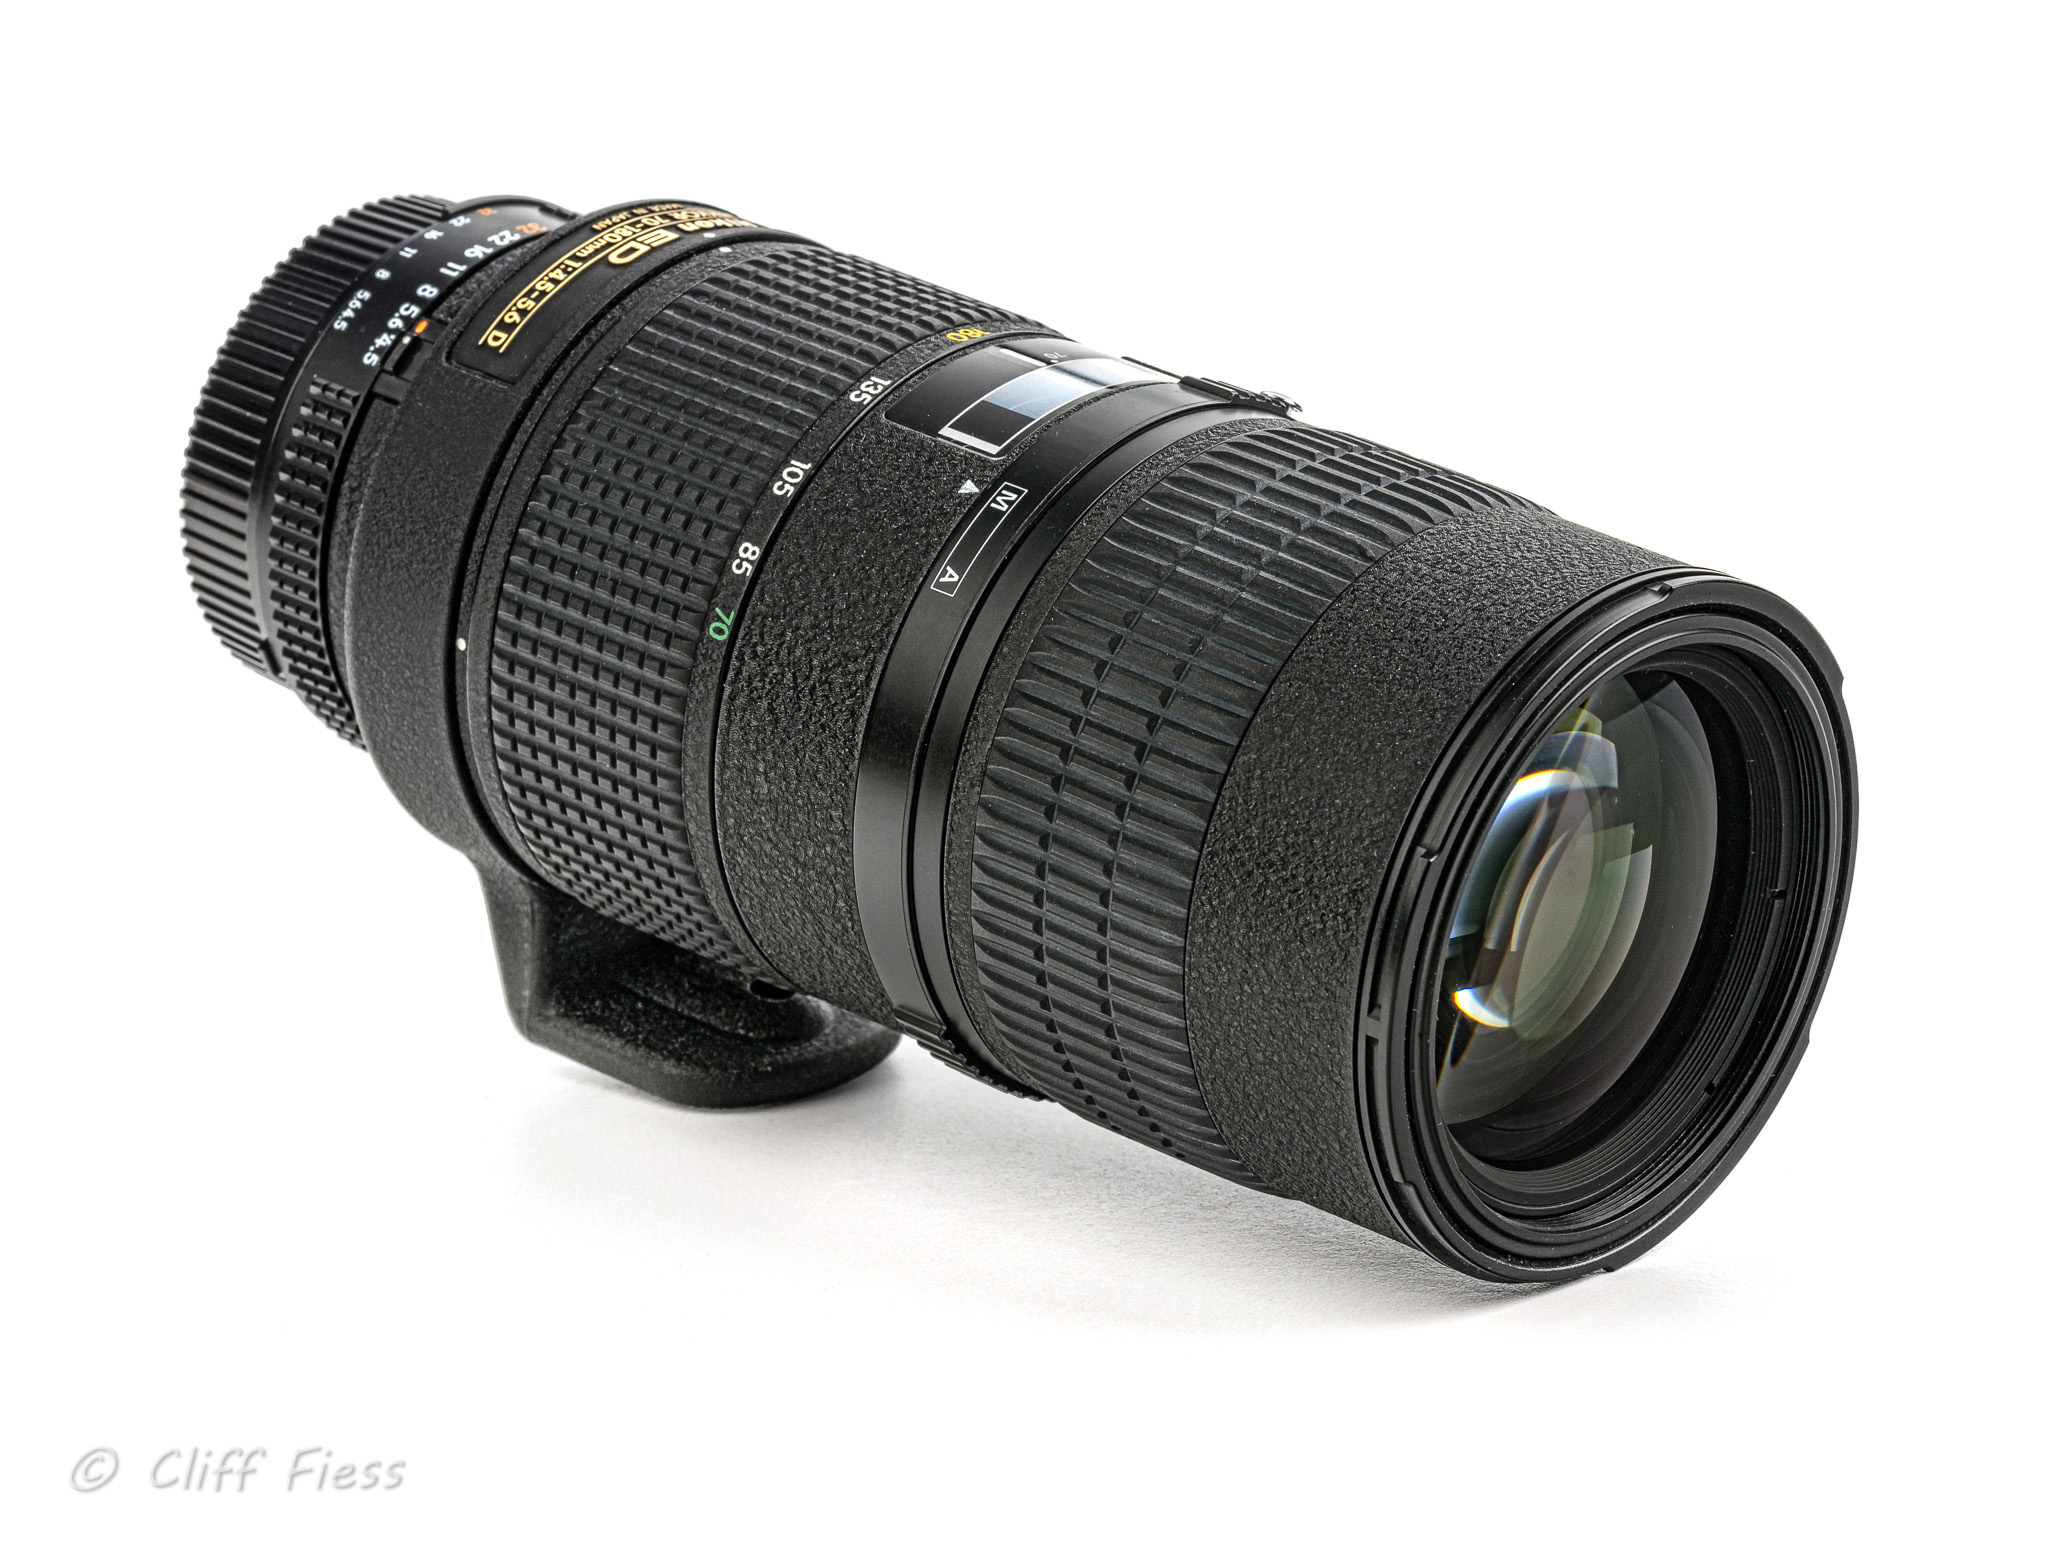 The awesome 70-180mm Micro-Nikkor